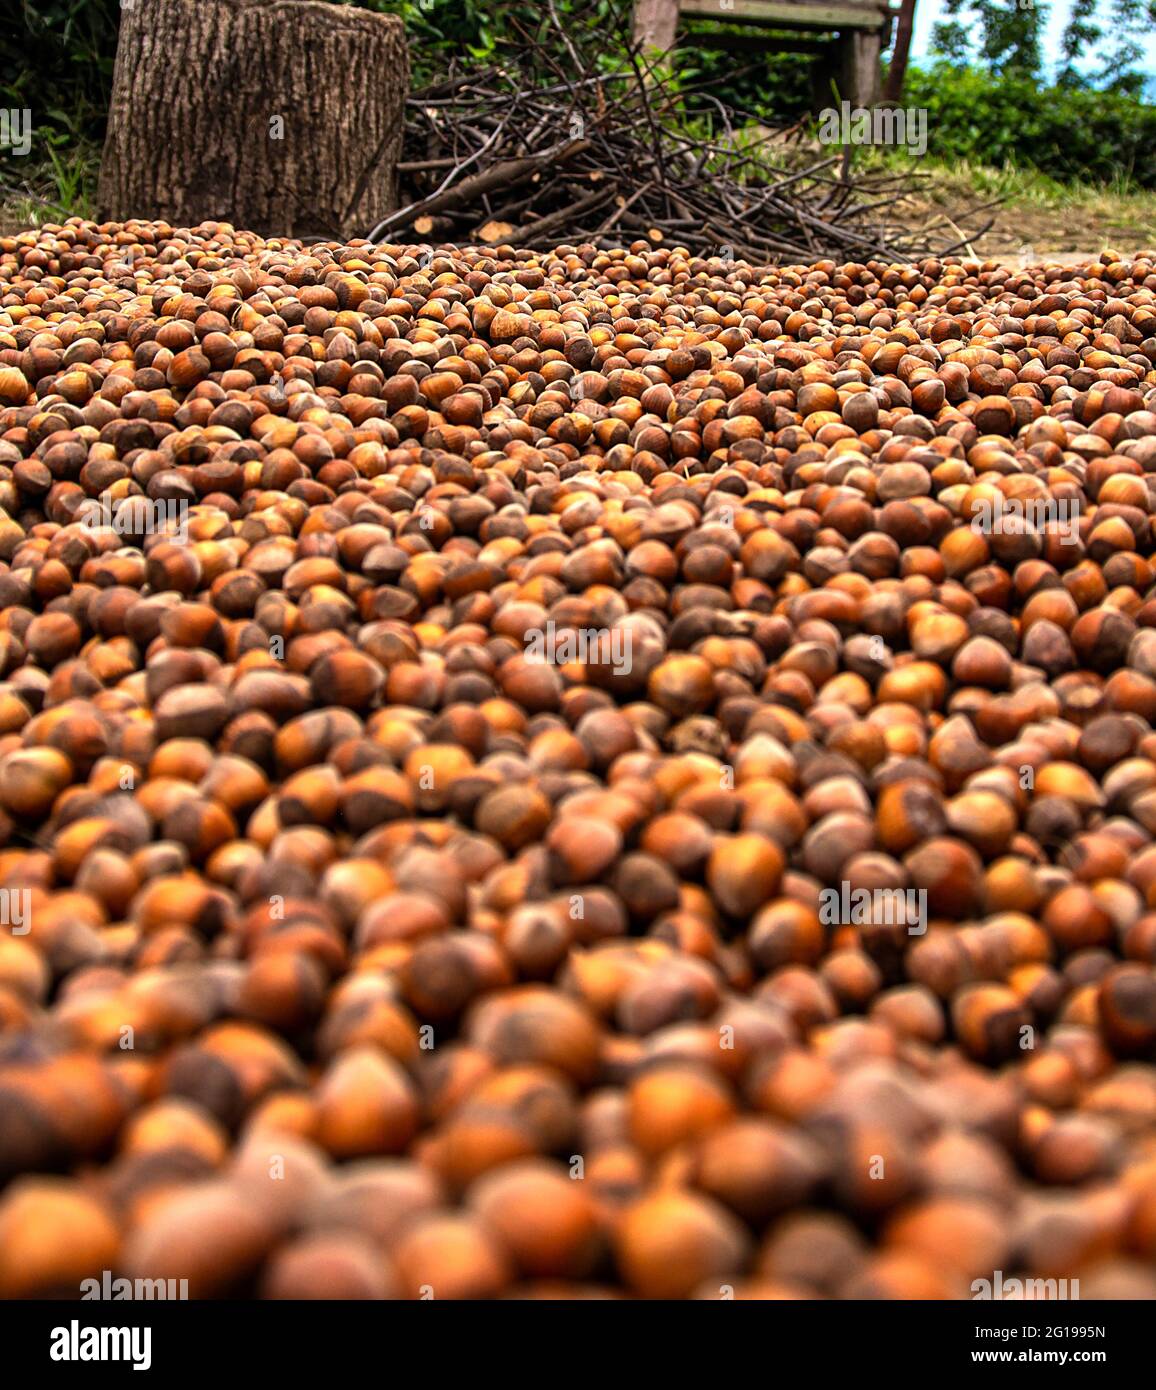 In the Black Sea, hazelnuts are laid in the gardens and dried. Stock Photo